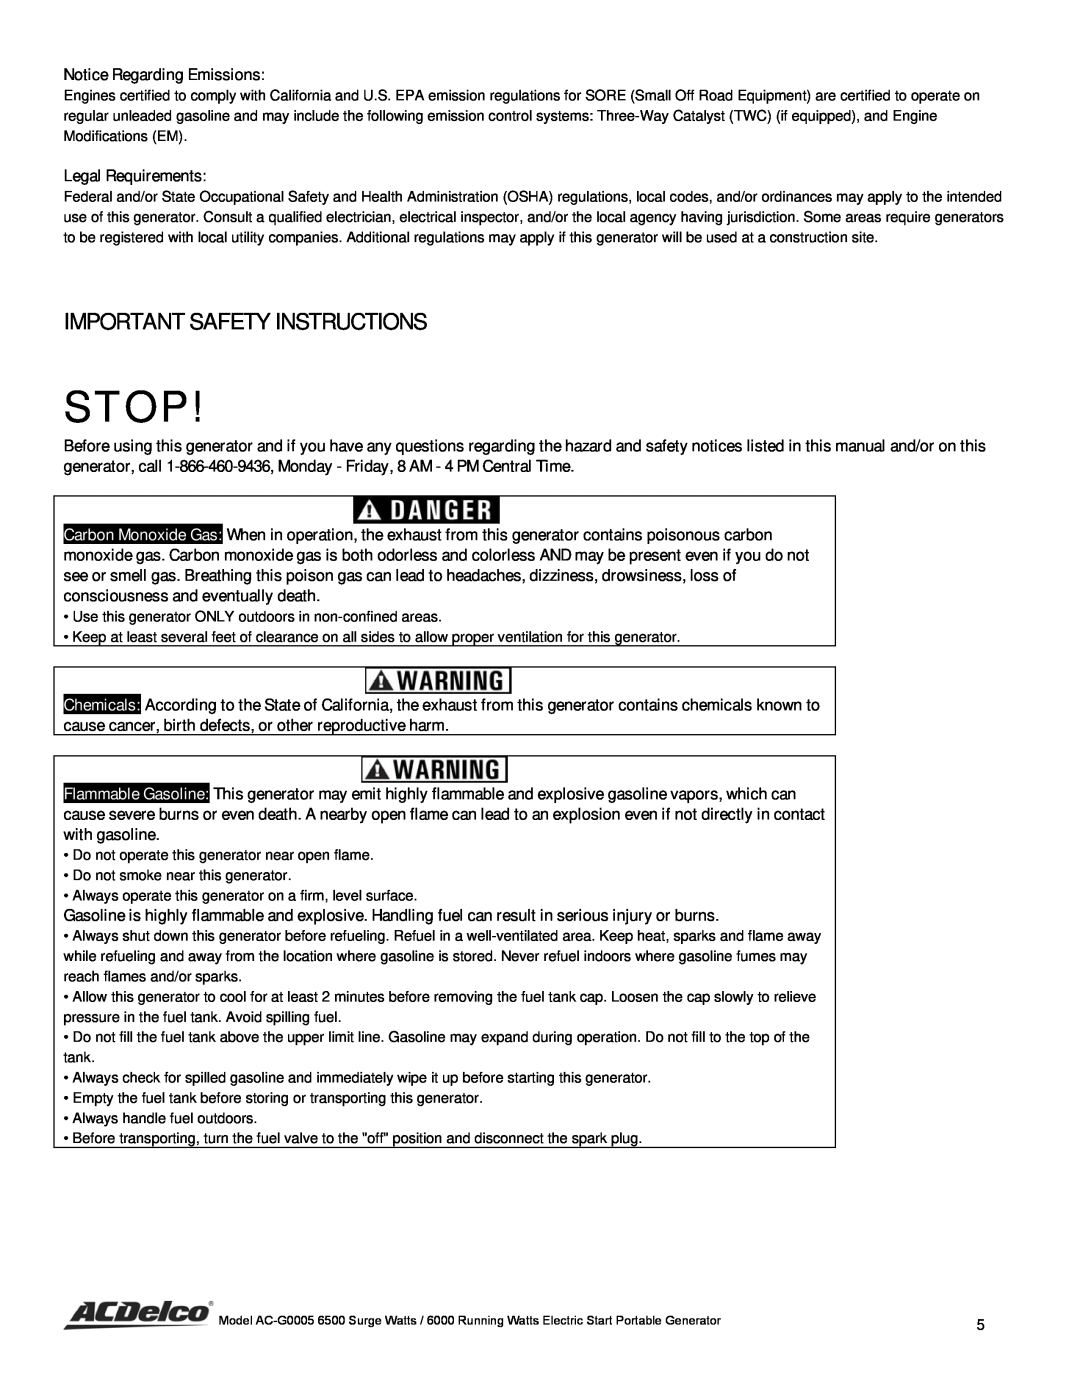 ACDelco AC-G0005 instruction manual Important Safety Instructions, Stop, Notice Regarding Emissions, Legal Requirements 